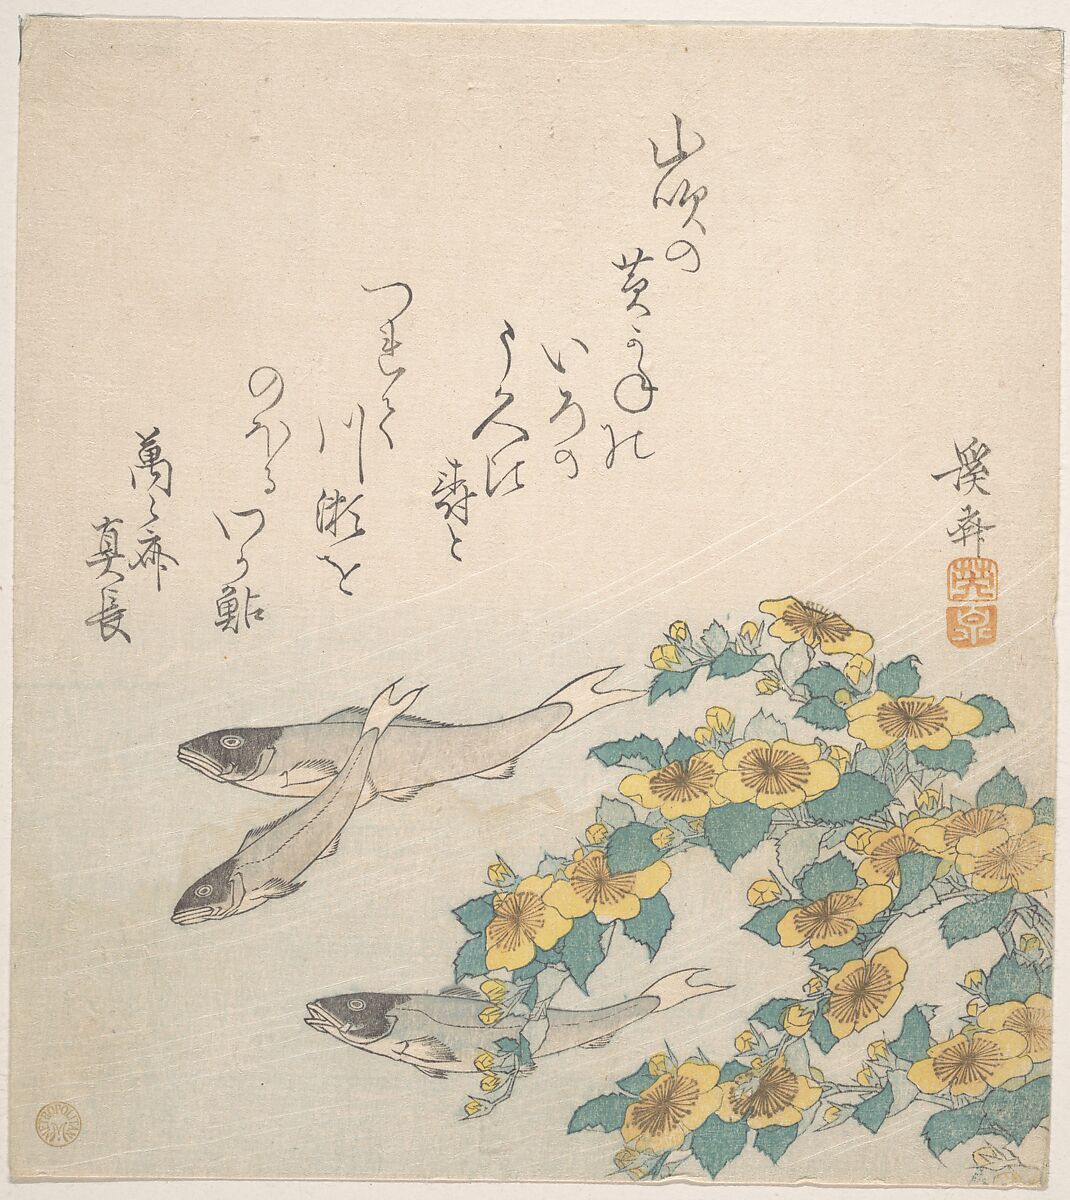 Fishes Swimming with Yellow Flowers, Keisai Eisen (Japanese, 1790–1848), Woodblock print (surimono); ink and color on paper, Japan 